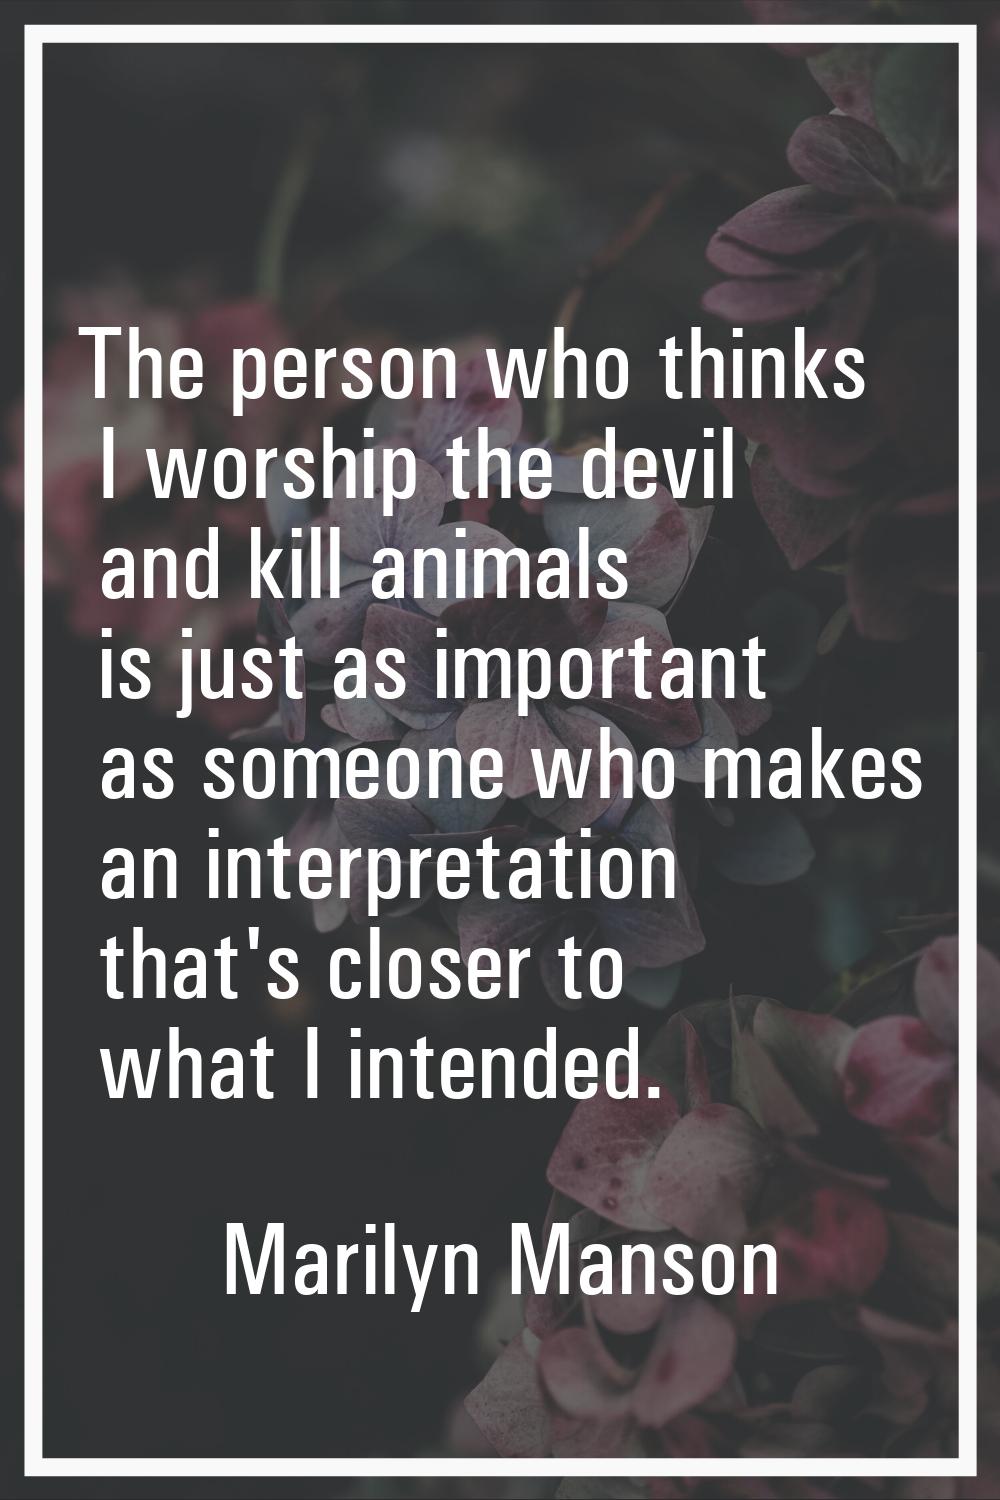 The person who thinks I worship the devil and kill animals is just as important as someone who make